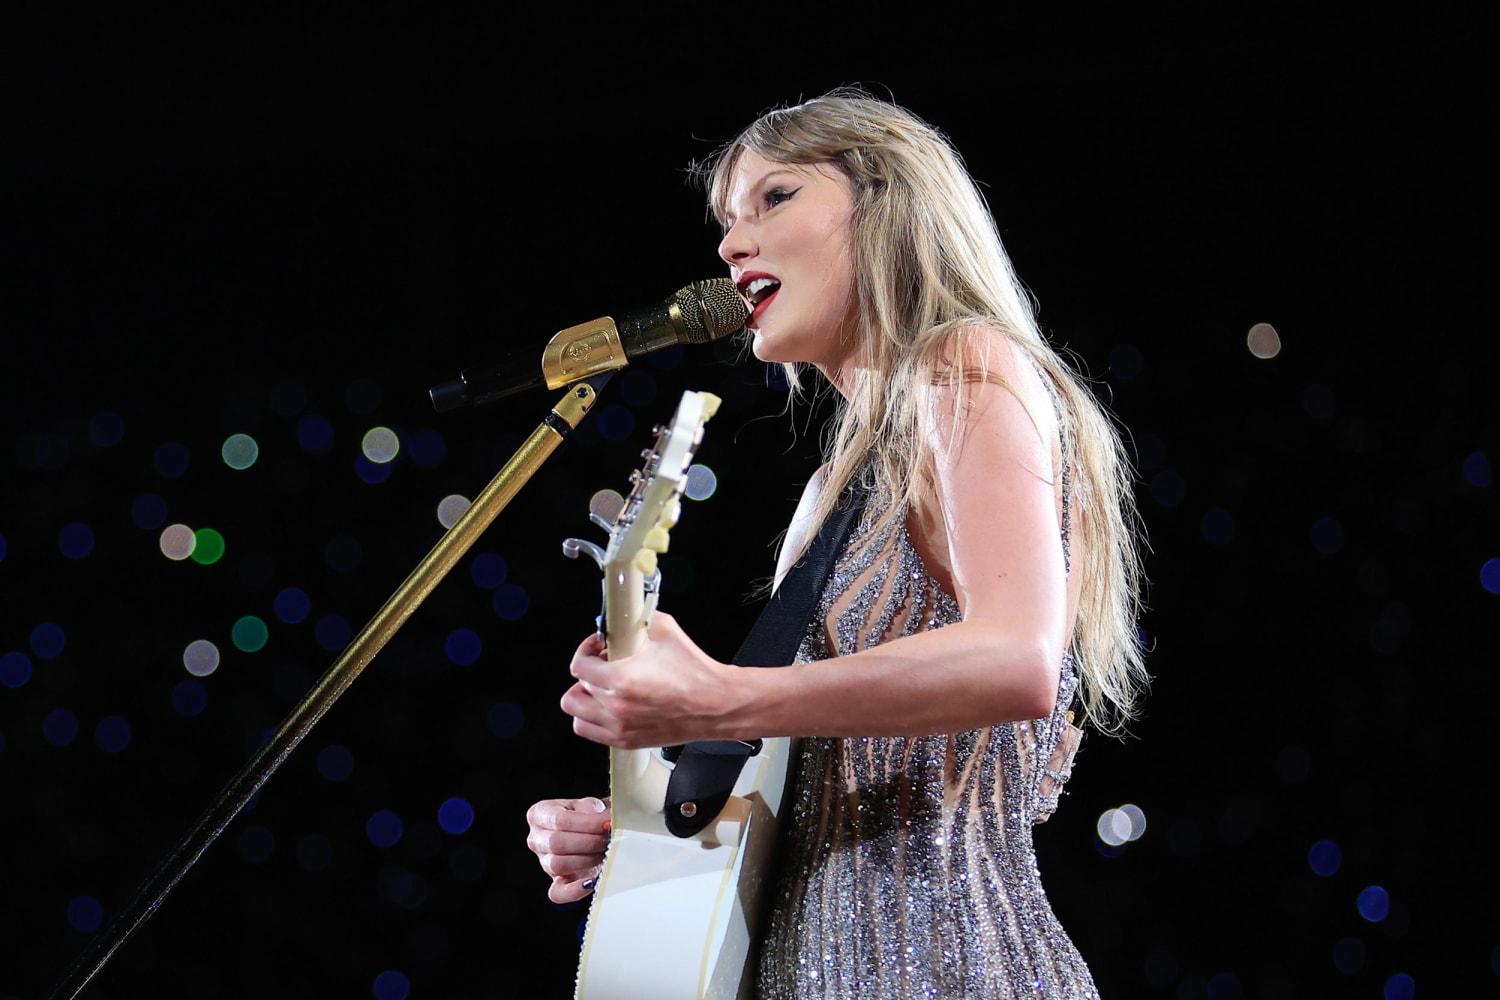 Taylor Swift postpones her Saturday concert in Rio after a 23-year-old fan died during the show during extreme temperatures.